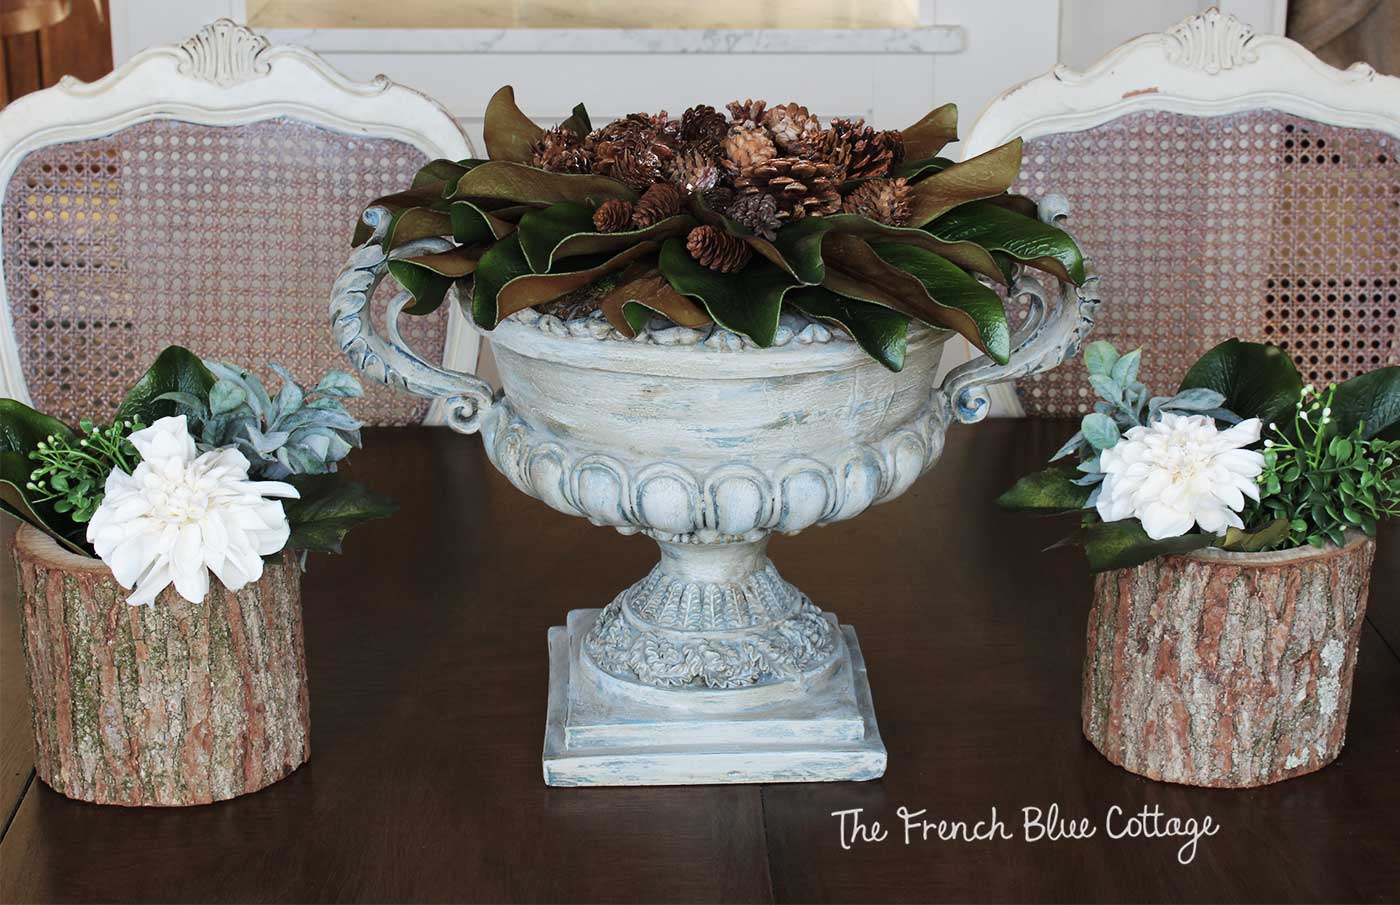 Simple winter table with magnolia, pinecones, and flowers.